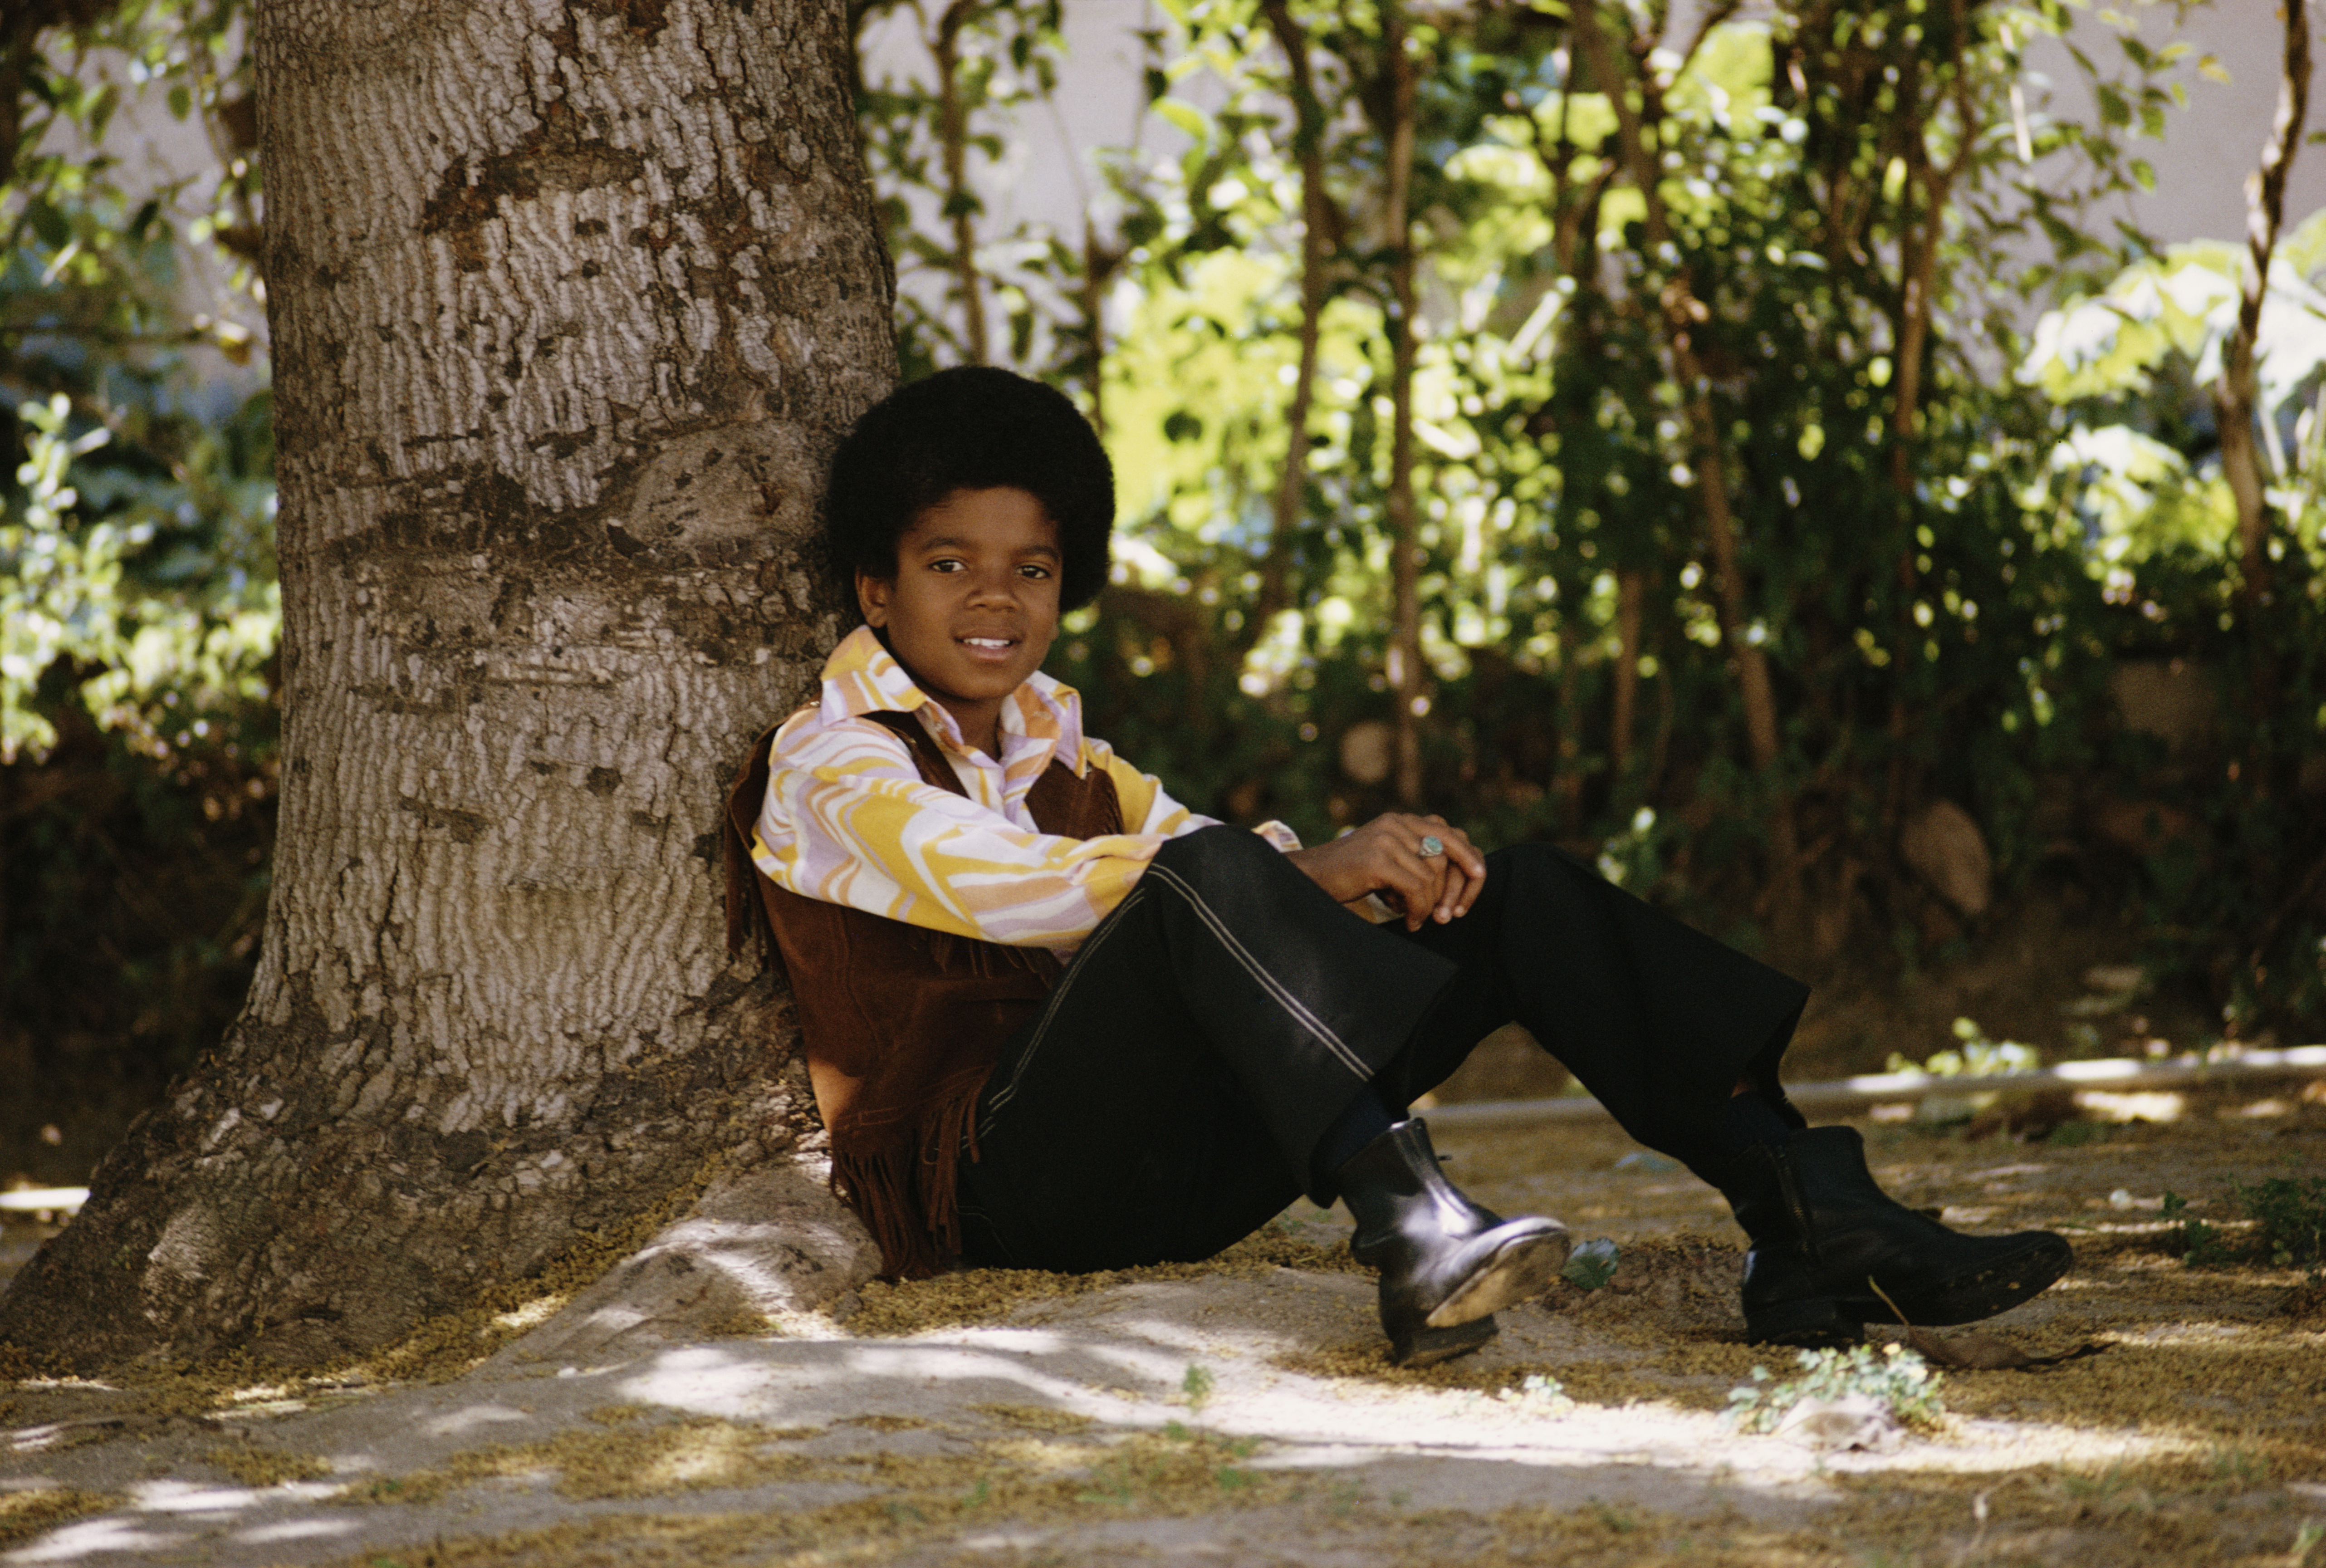 Michael Jackson posing for a portrait in 1970. | Source: Getty Images